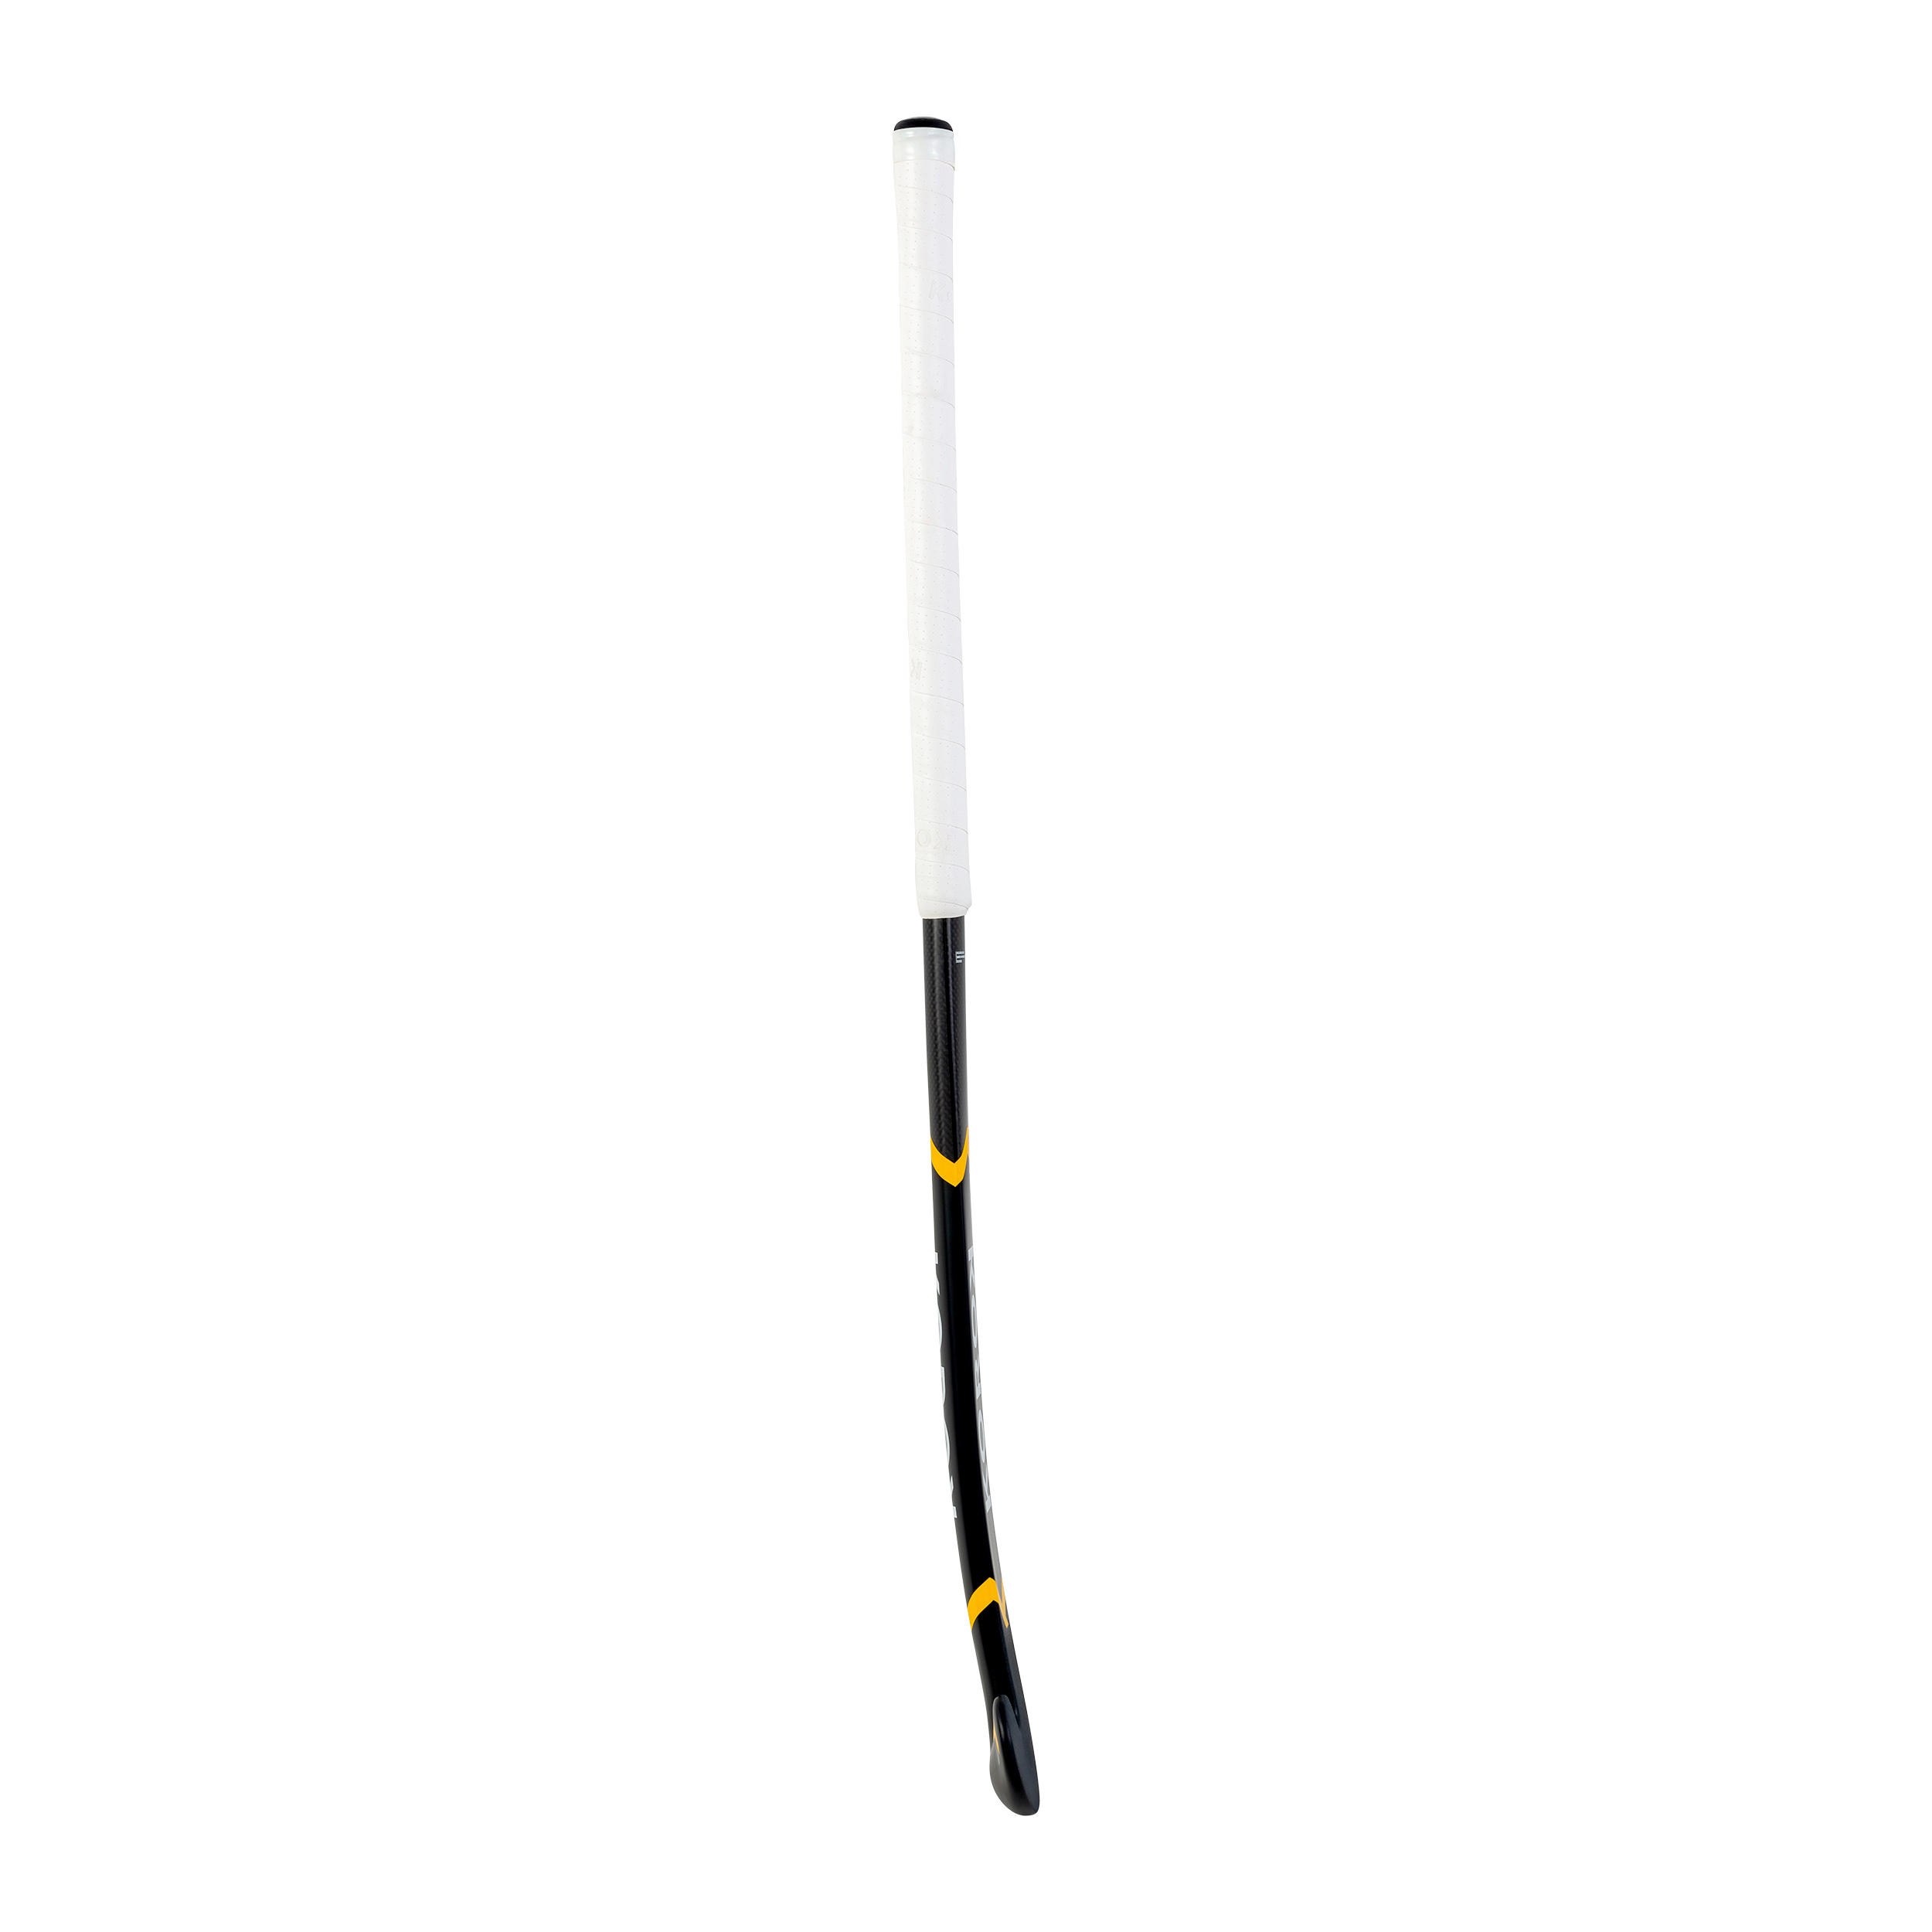 Kids' 20% Carbon Low Bow Field Hockey Stick FH920 - Black/Yellow 8/12